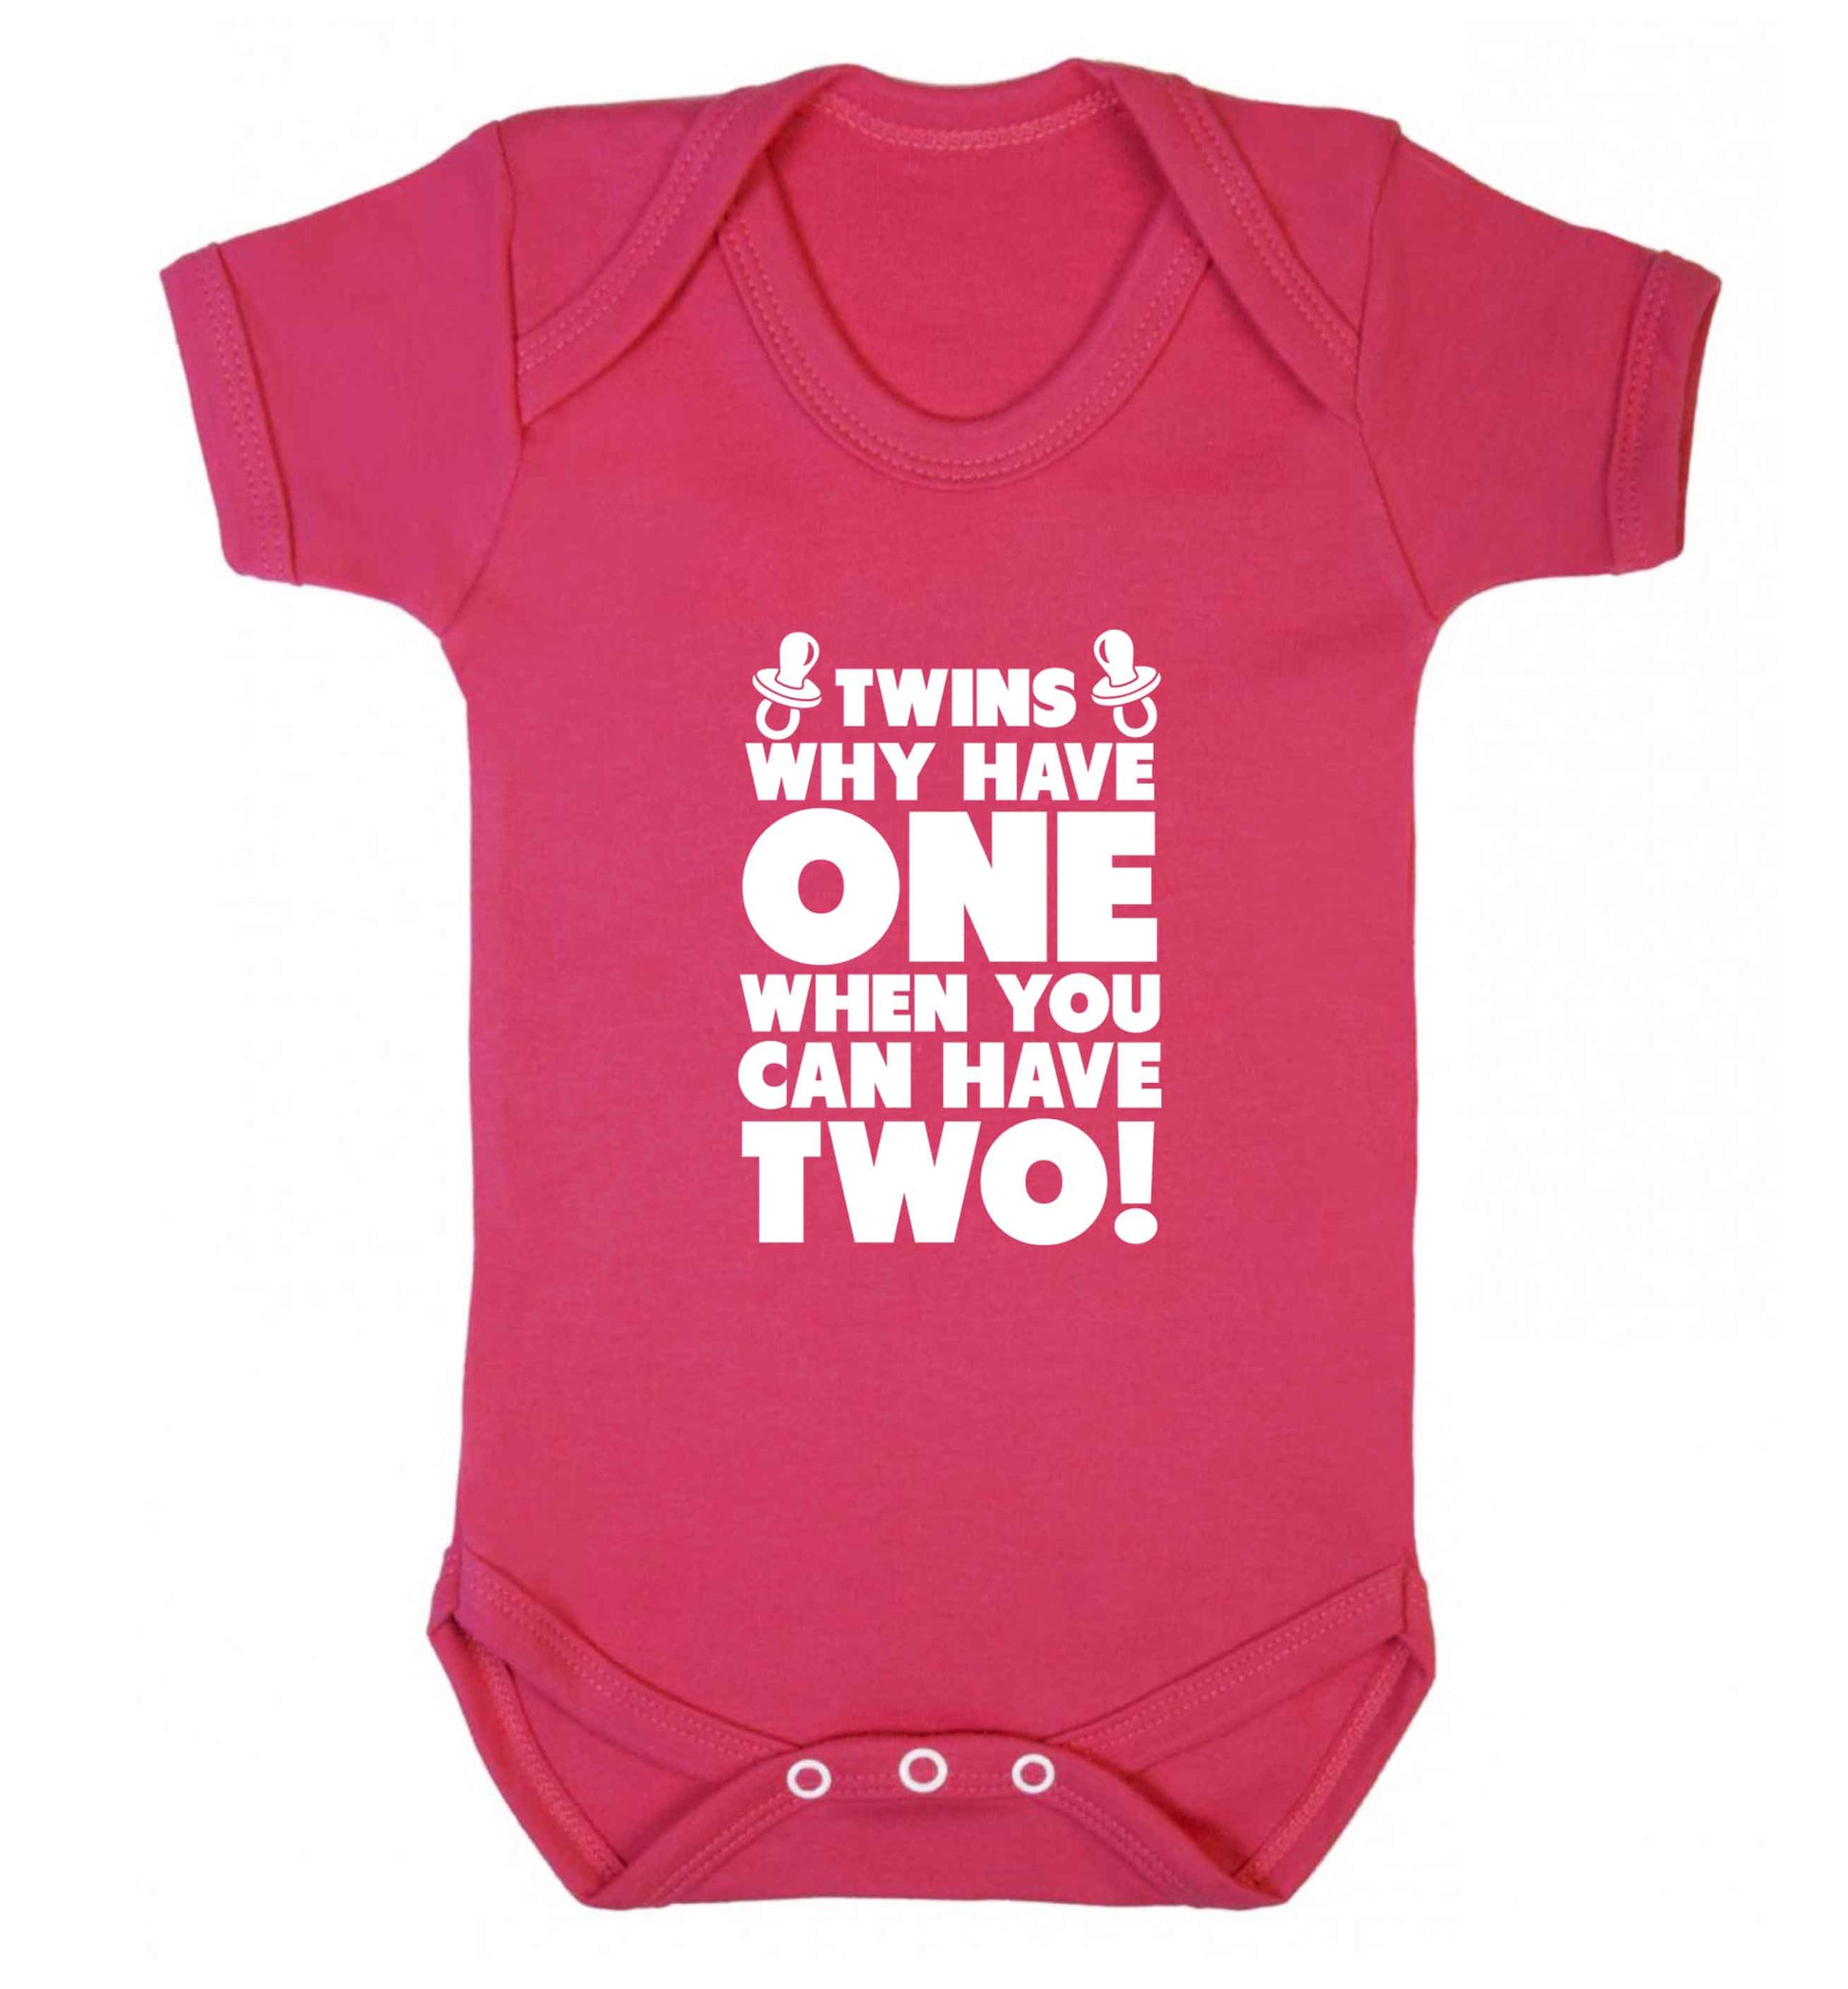 Twins why have one when you can have two baby vest dark pink 18-24 months